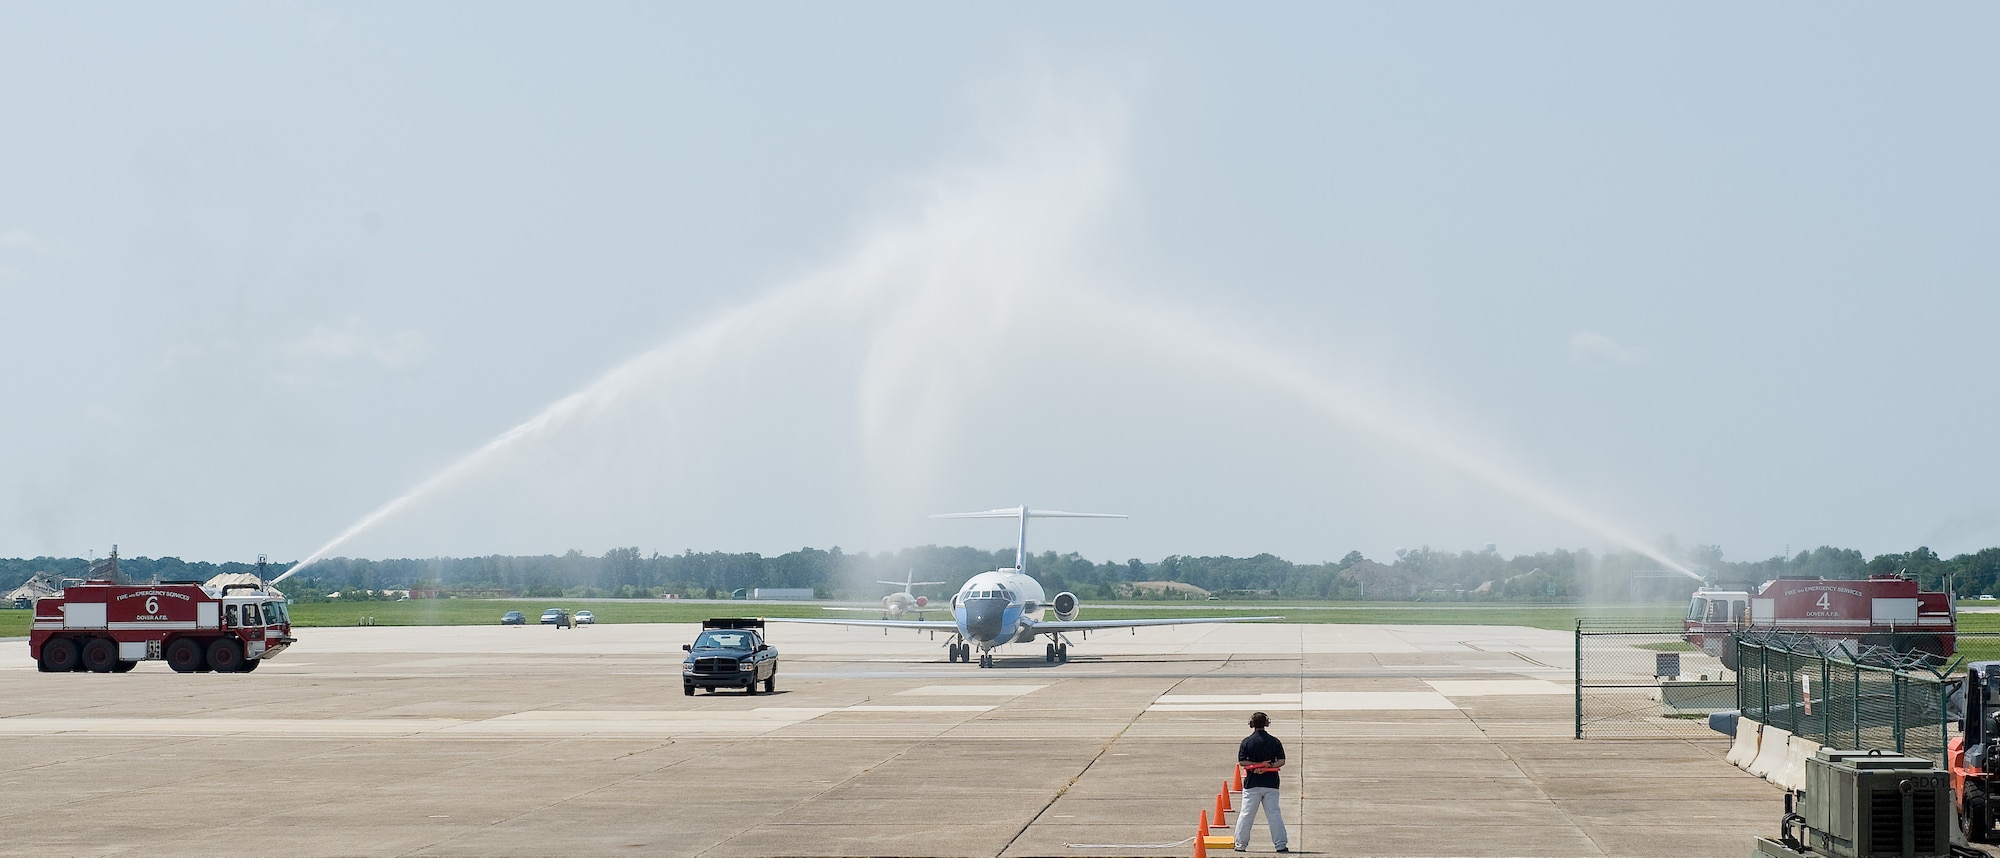 Air Force Two receives a traditional spray-down as it taxies into the Air Mobility Command Museum, Aug. 18, 2011. The aircraft retired at the AMC Museum after more than 30 years of service. (U.S. Air Force photo by Roland Balik)